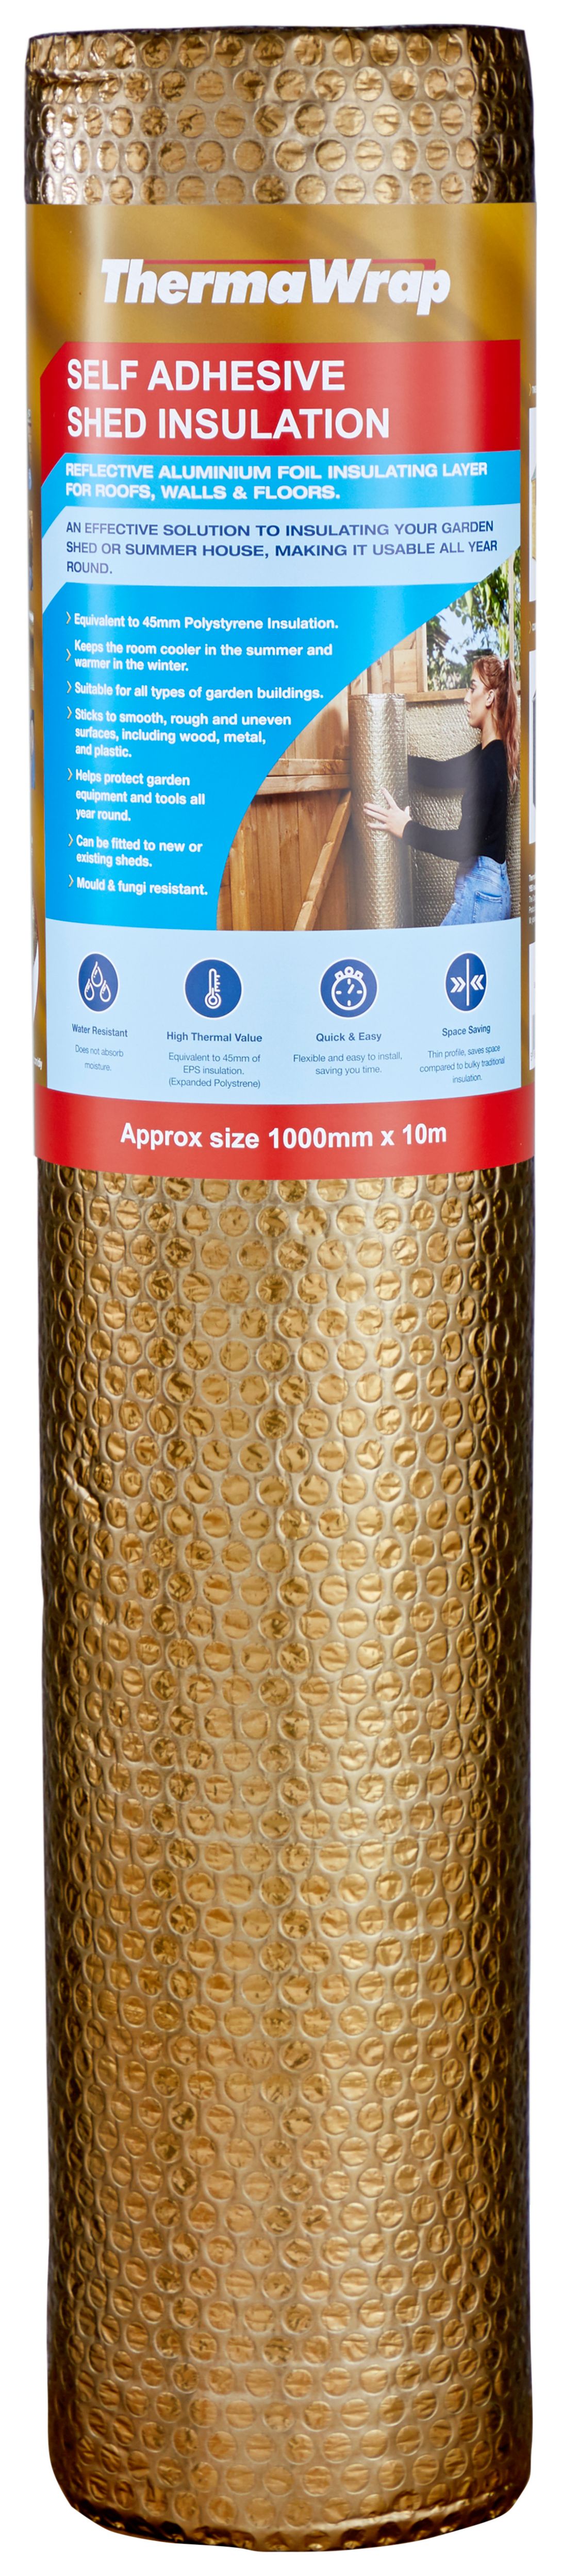 Image of ThermaWrap Self-Adhesive Shed Insulation Roll - 1000mm x 10m